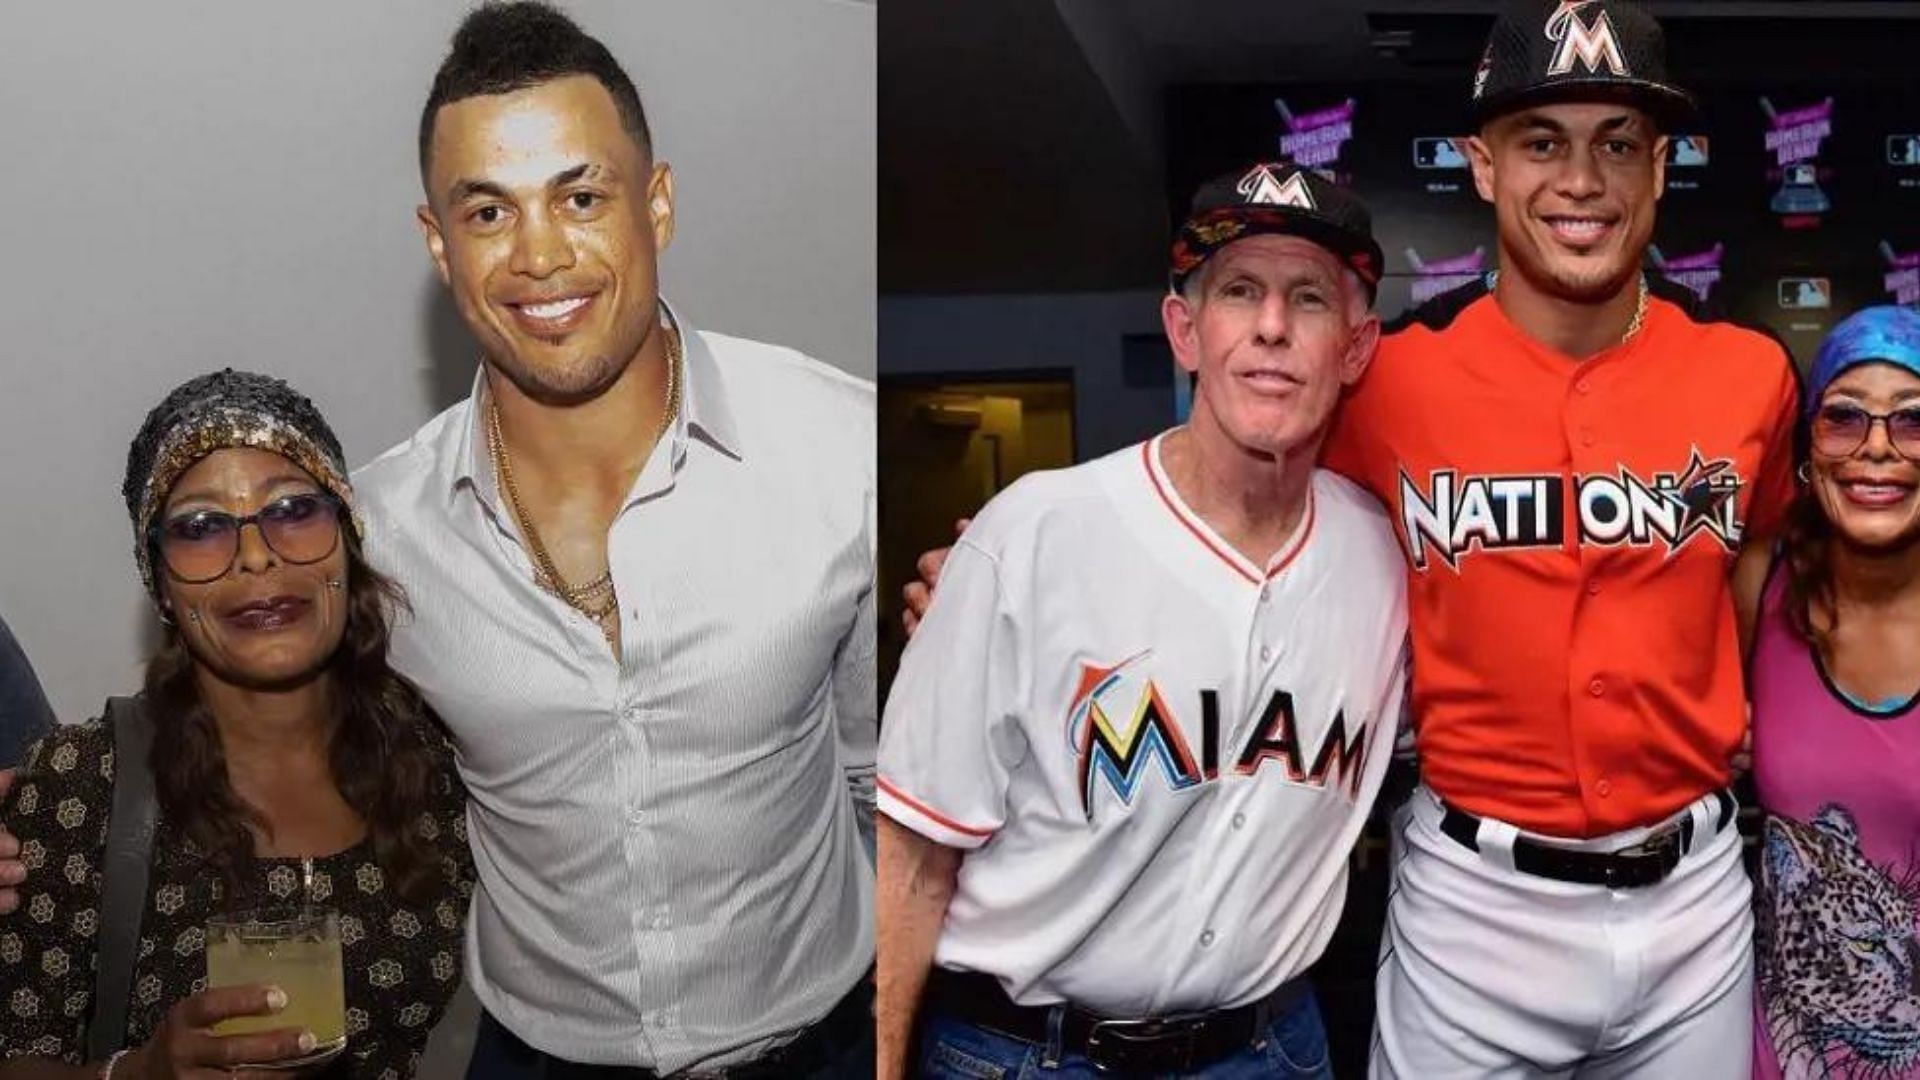 Who are Giancarlo Stanton's parents? A glimpse into the personal